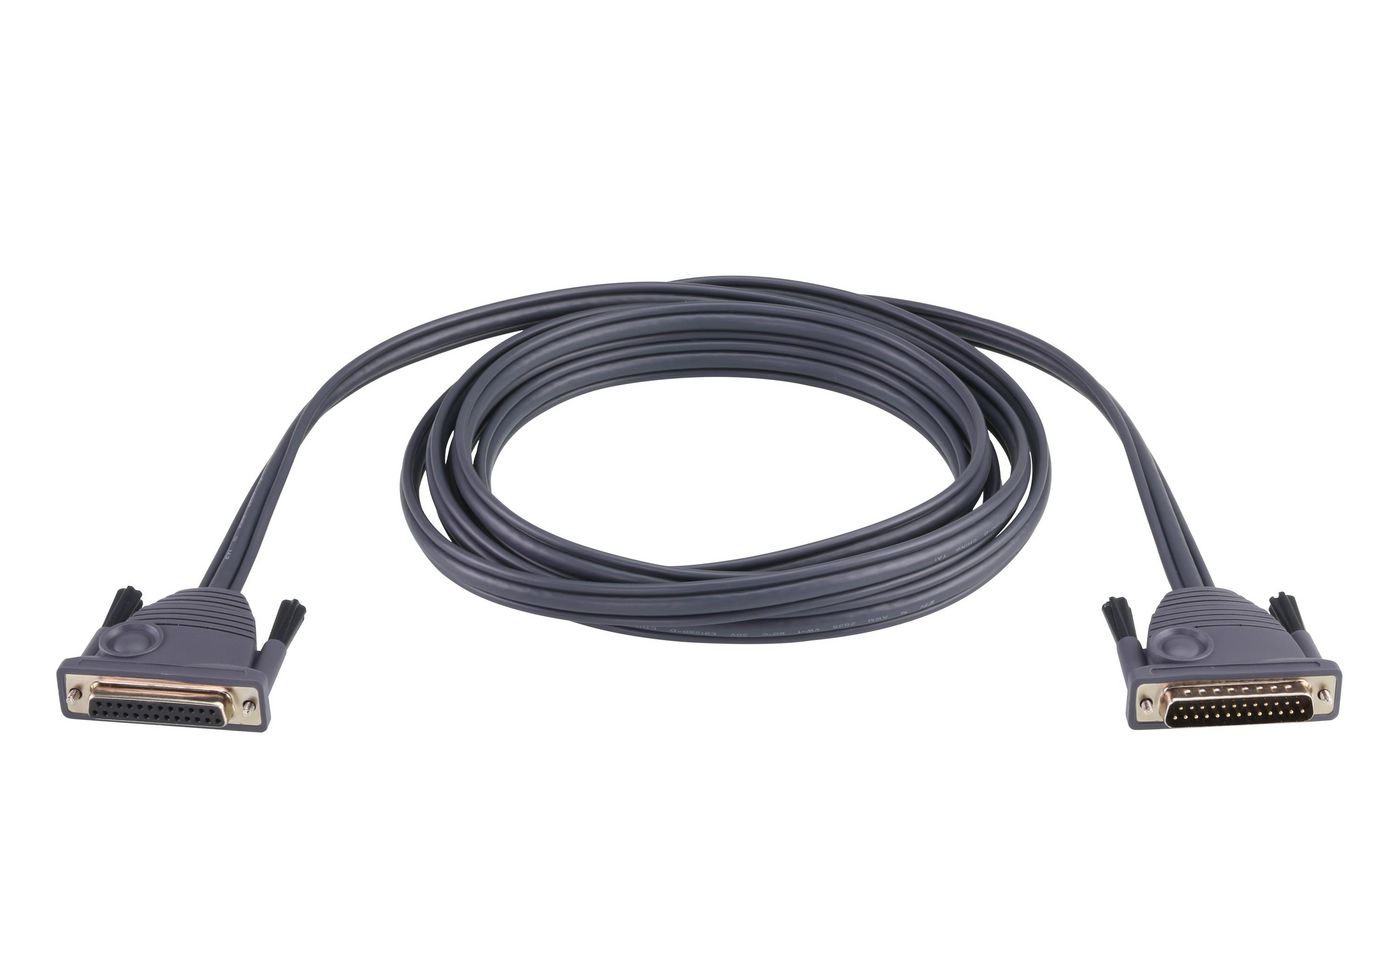 Daisy Chain Cable 2l-1705d 5m